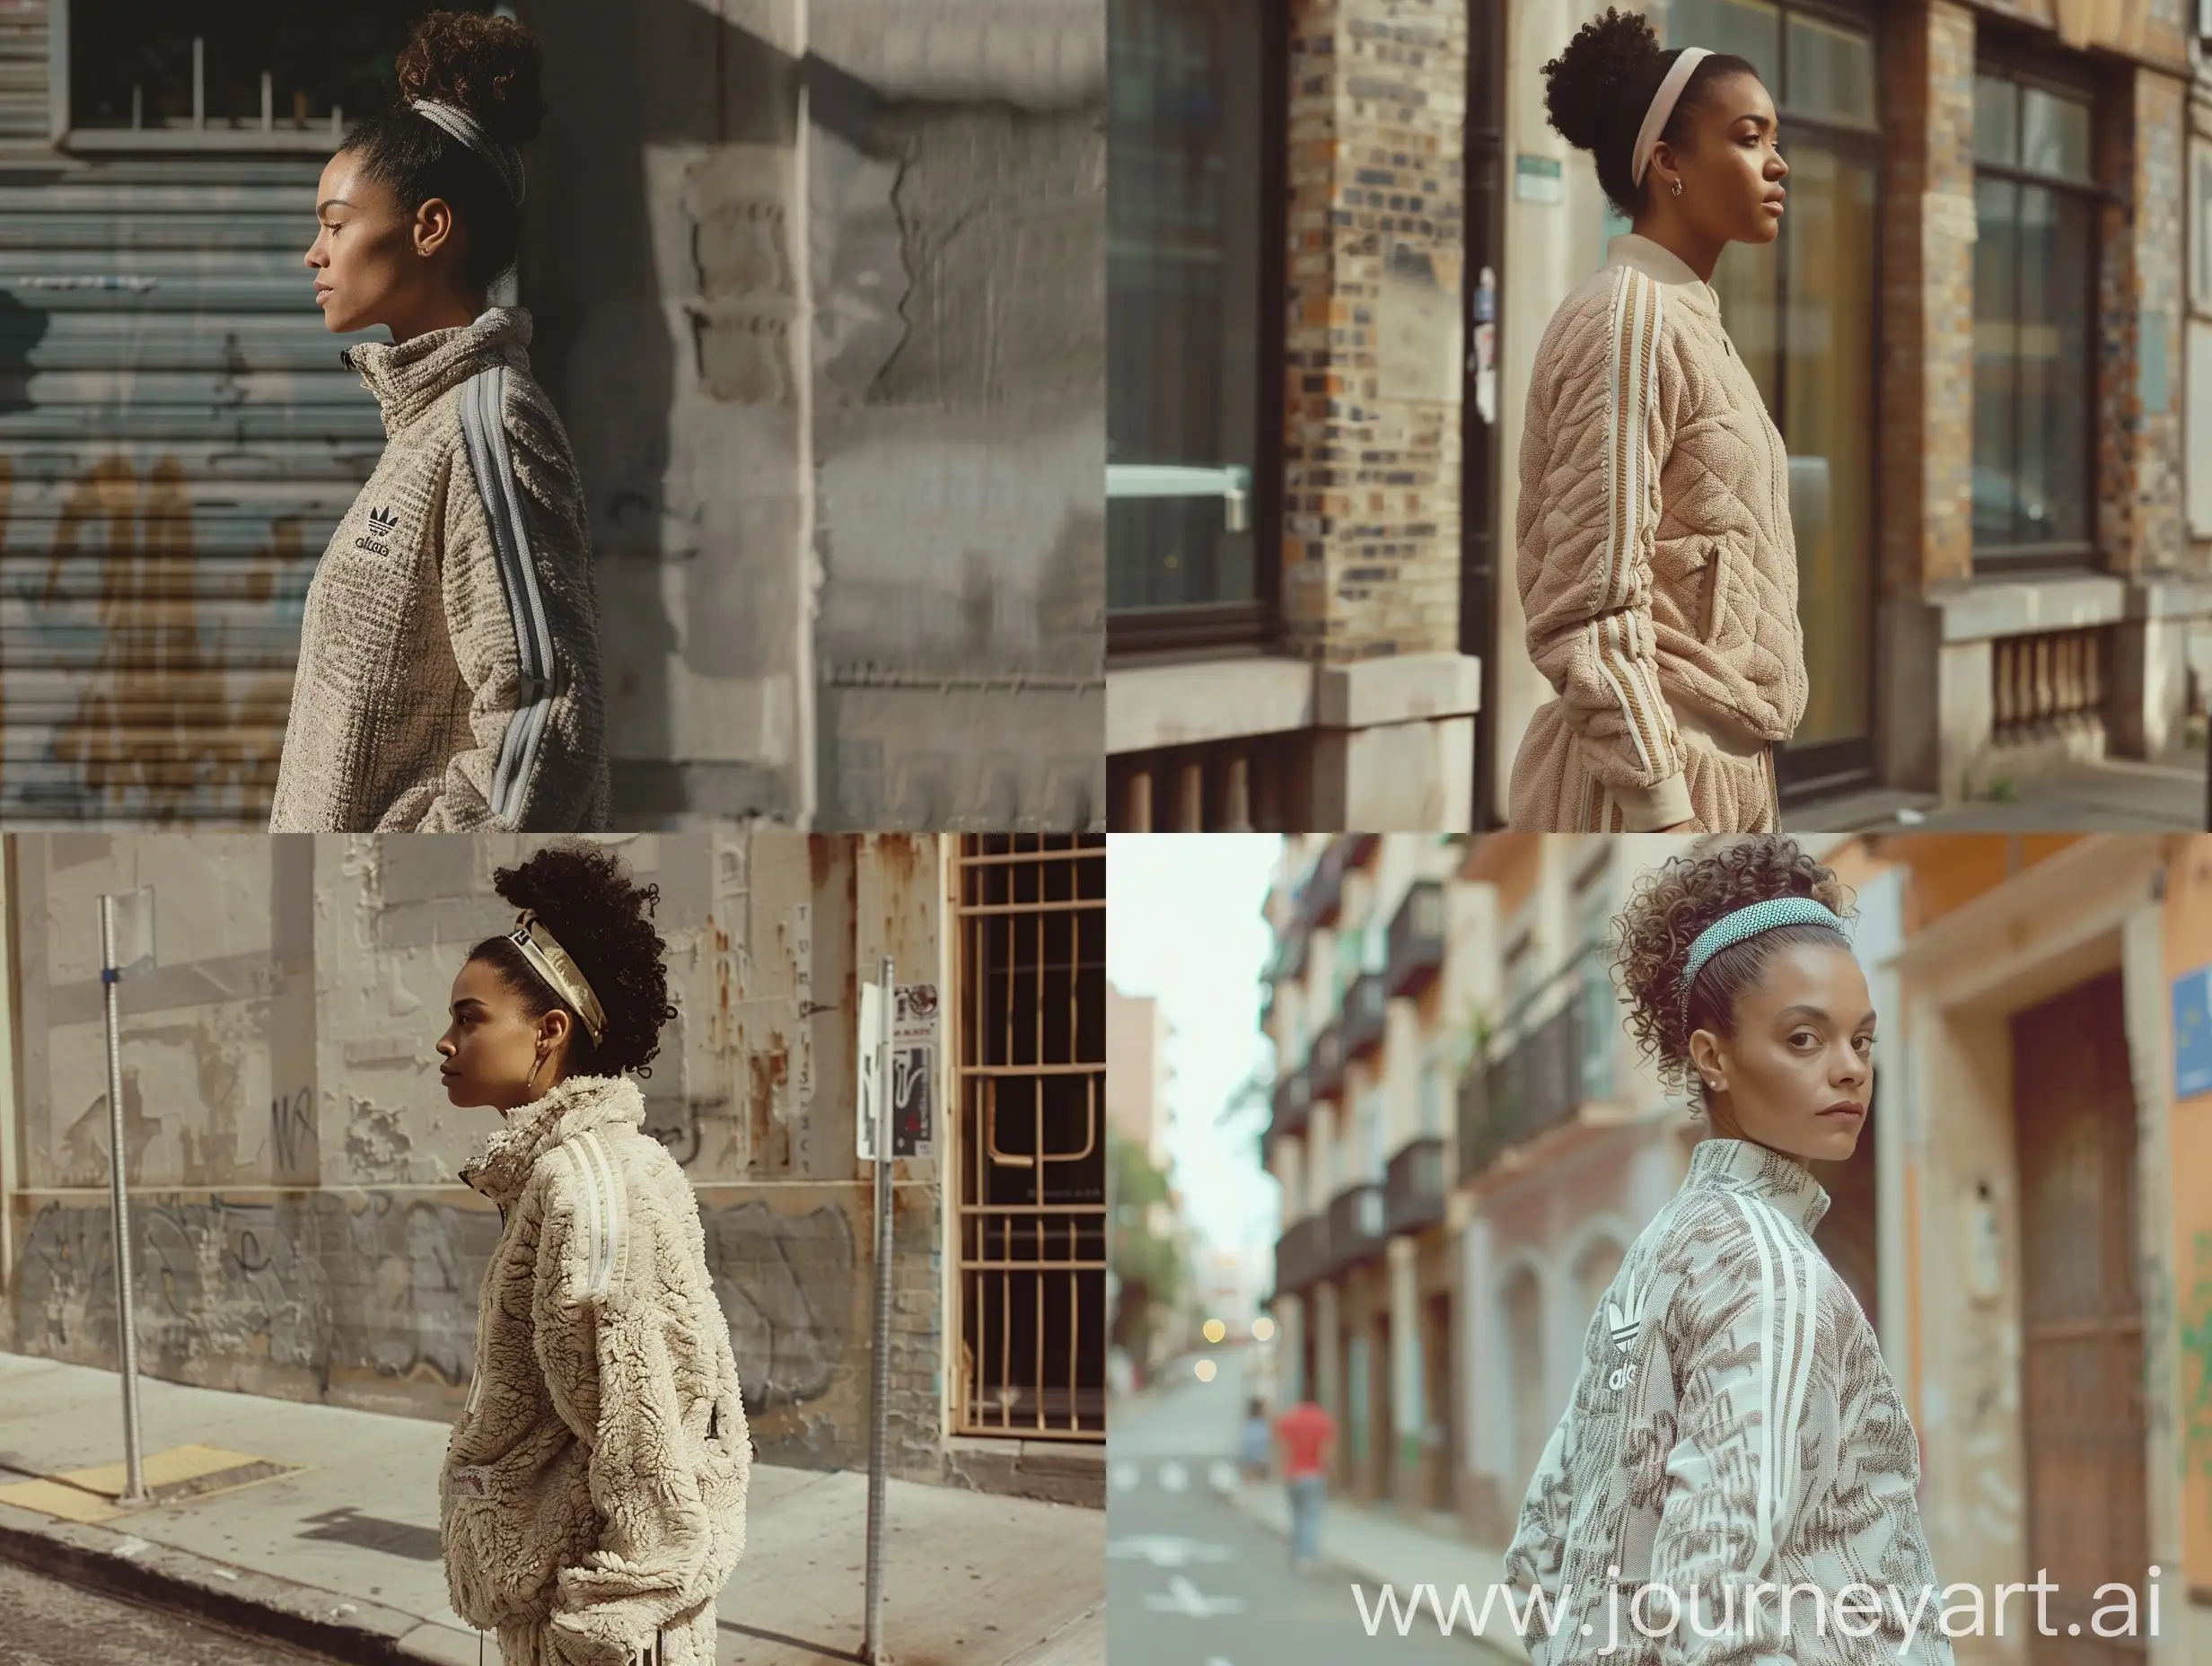 A woman, reminiscent of Tessa Thompson and Fabiula Nascimento, stands on the street wearing an Adidas tracksuit, her head adorned with a headband. The texture of the tracksuit adds depth to her look, while the profile shot captured by Estevan Oriol enhances the promotional still.